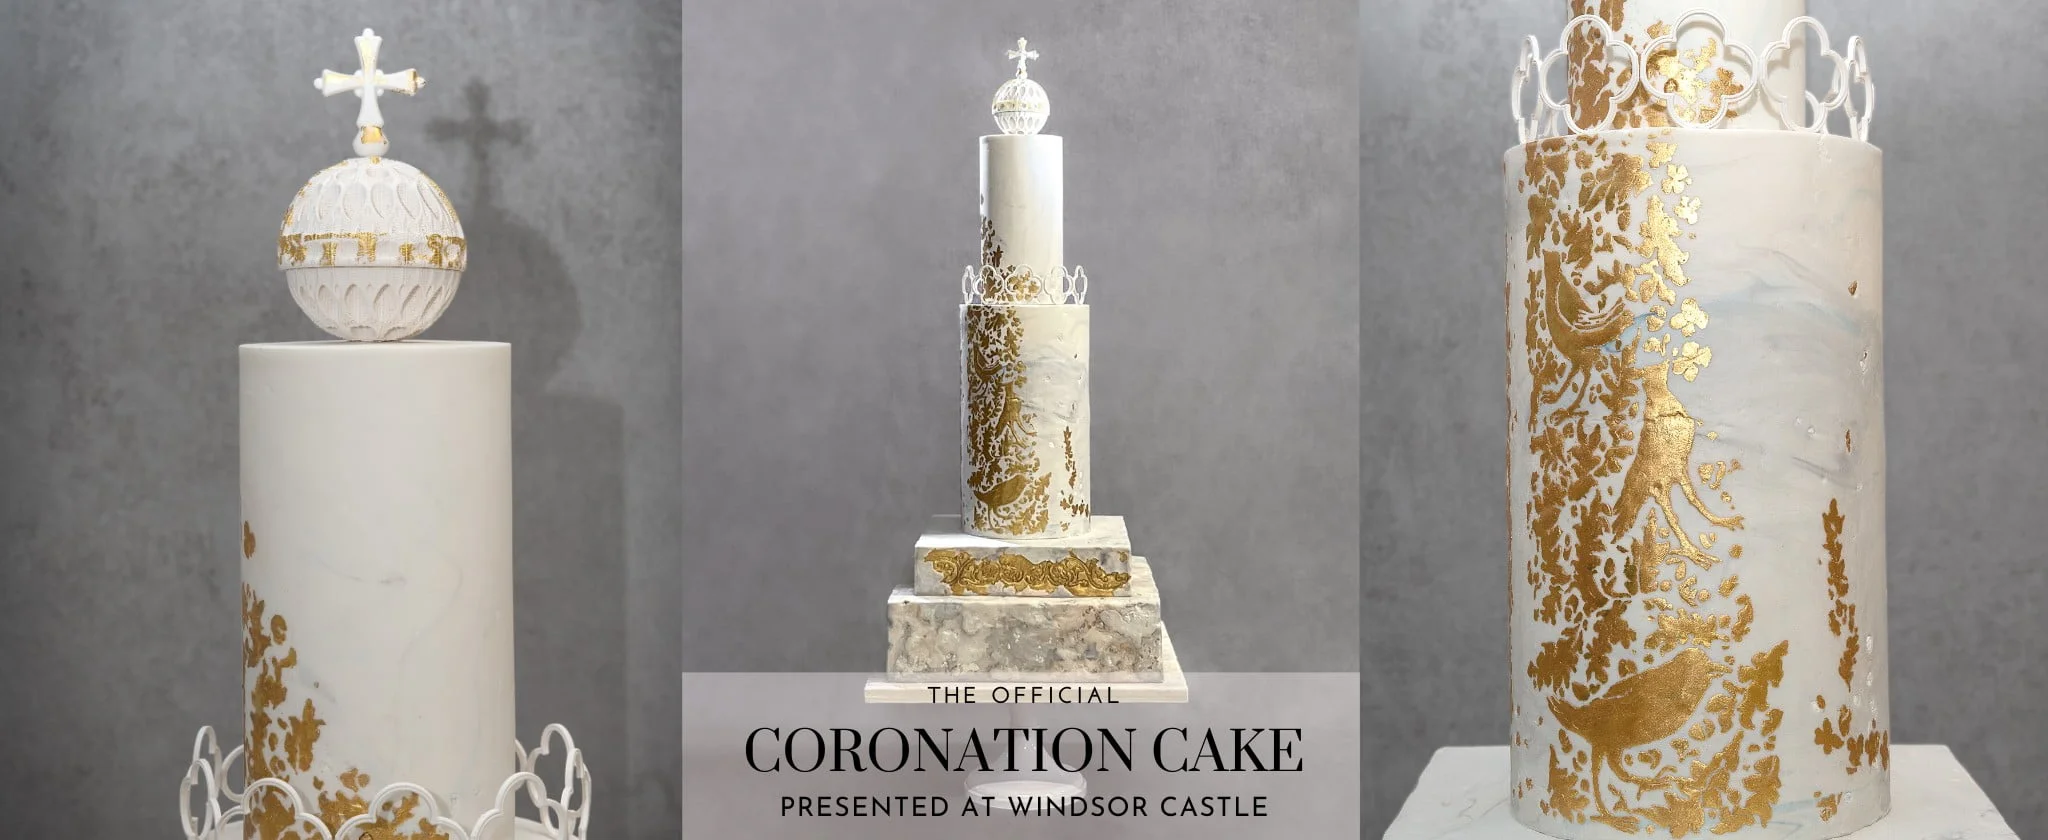 The Official Coronation Cake